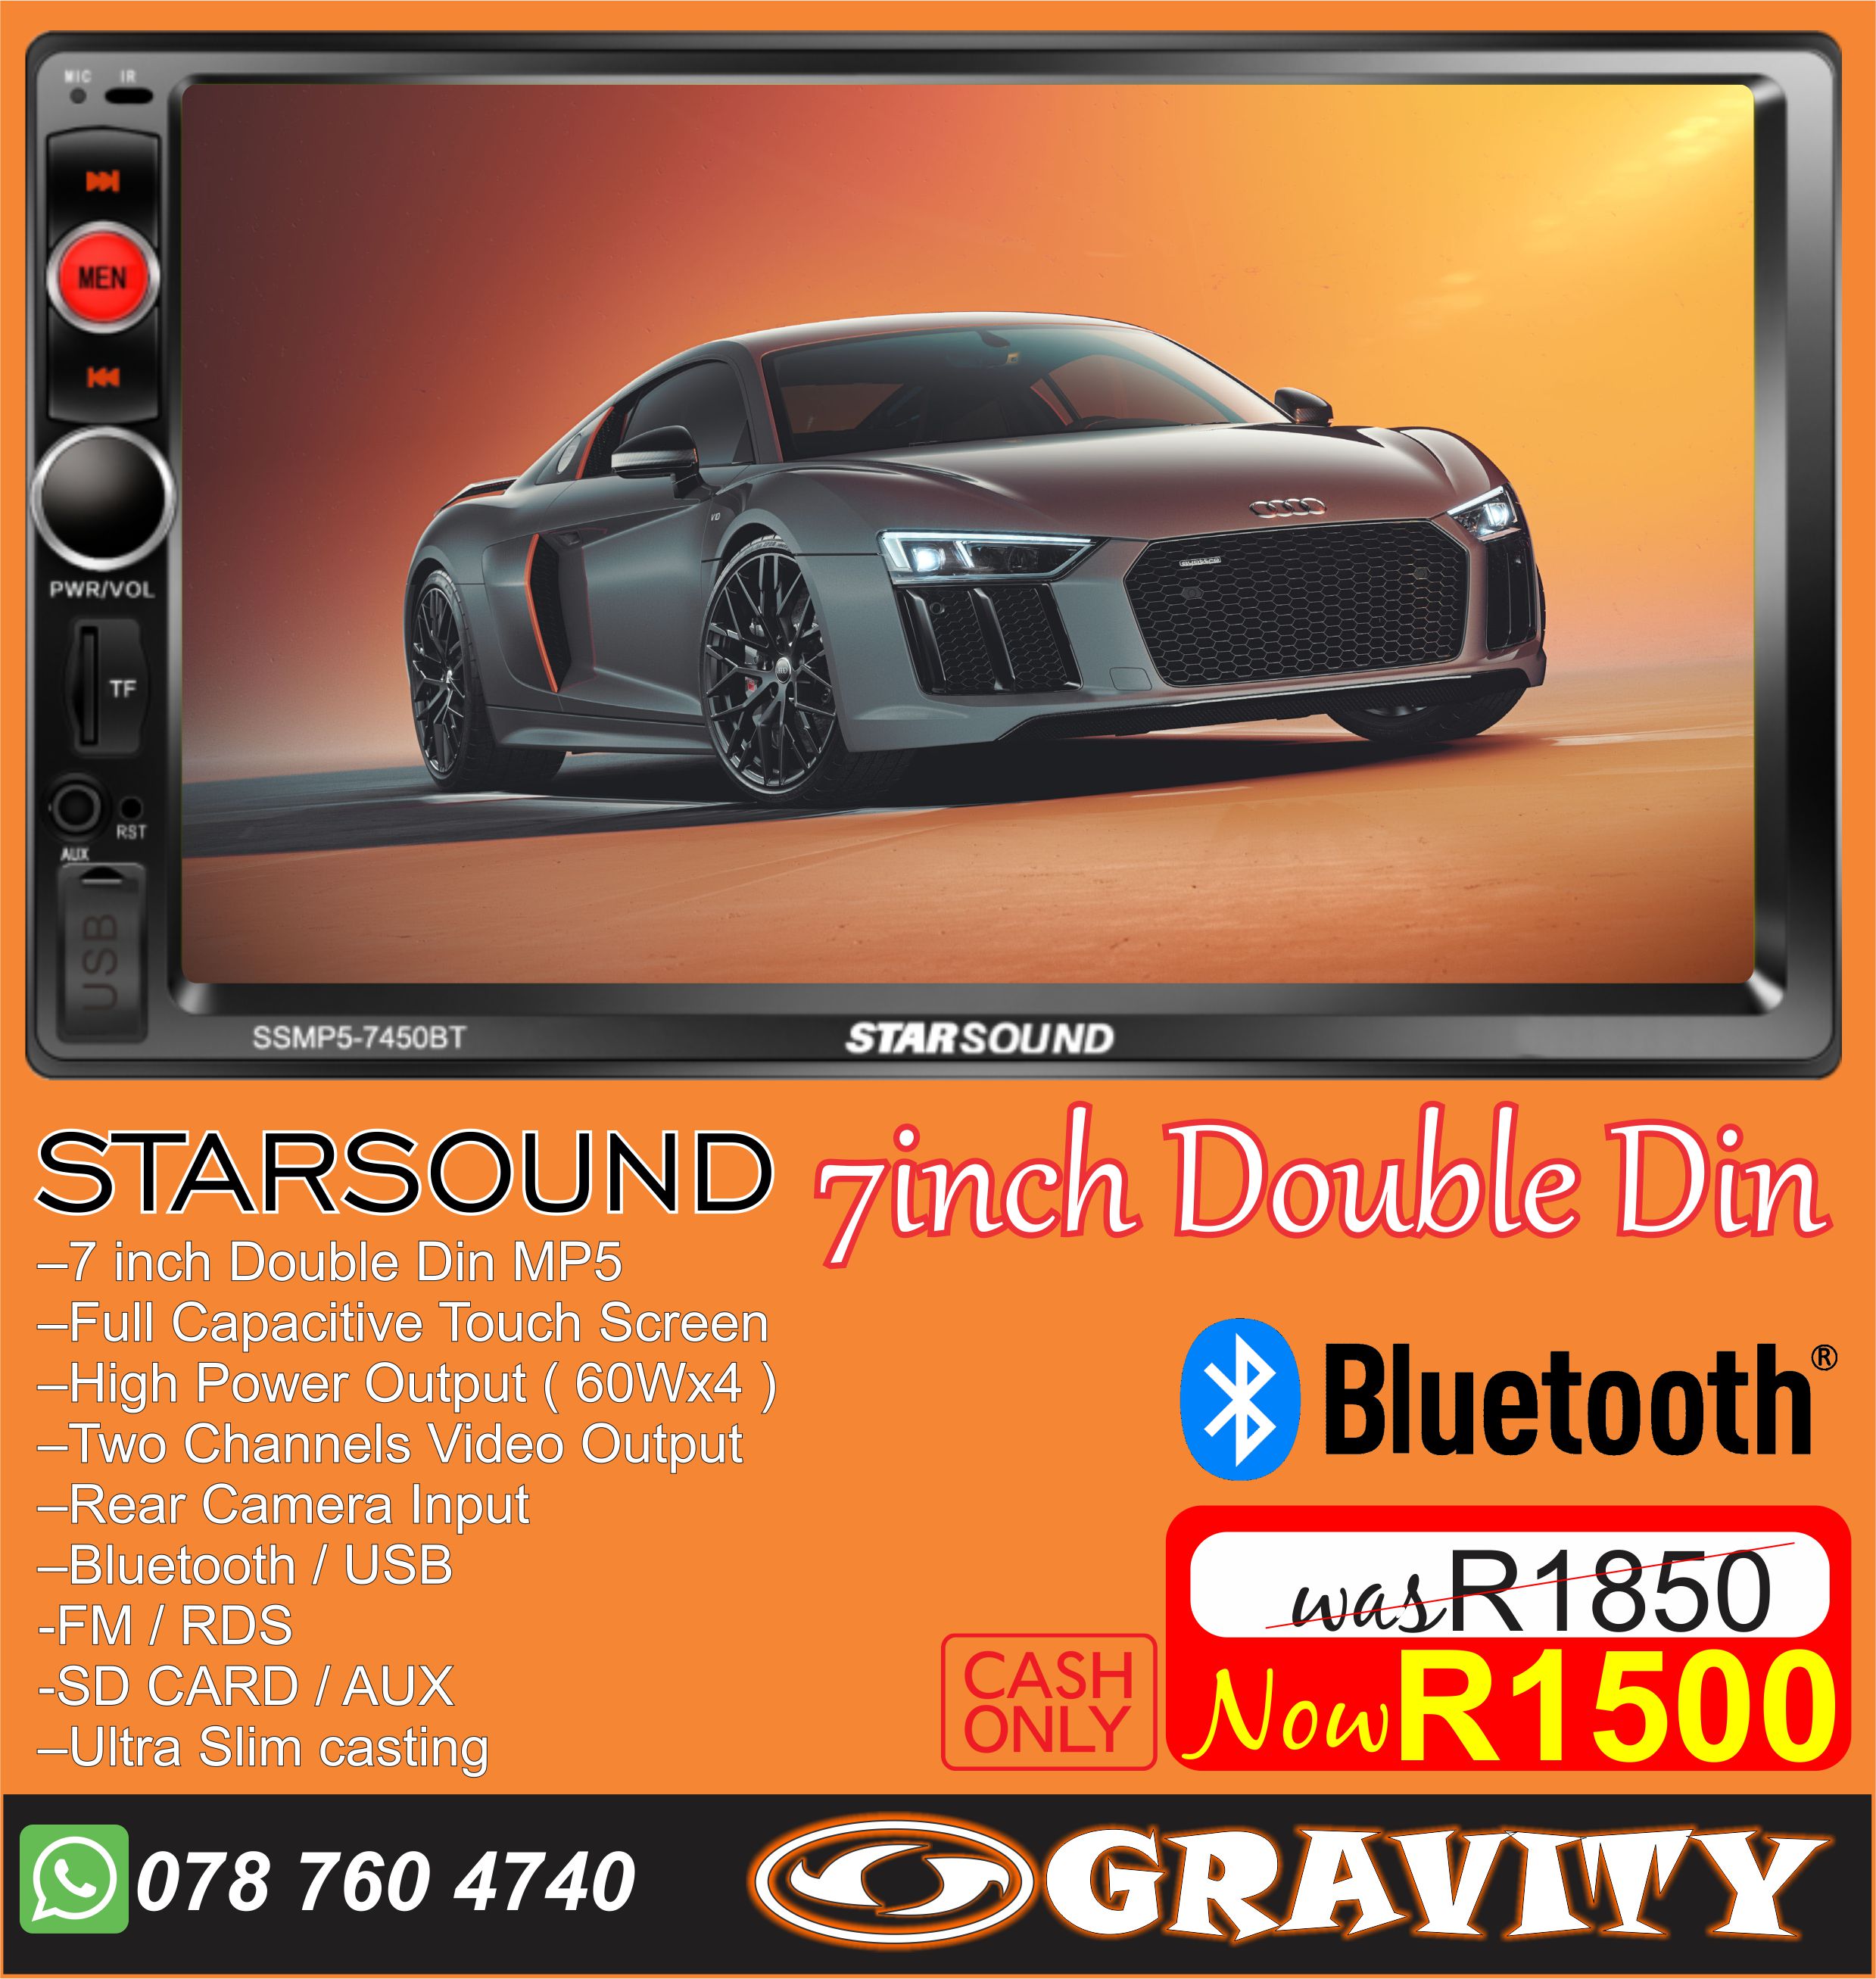 cheap double din , car audio combo , car audio equipment , sony , pioneer ,jvc , kicker , targa , xtc , jbl . starsound  | car audio durban | car audio fitment durban | dj sound durban | disco dj pa equipment durban | disco dj lighting durban | dj mixer durban | dj power amp durban | tv box durban | air mouse durban | behringer durban | gravity sound and lighting warehouse durban | dj smoke achine durban | dj smoke fluid durban | disco dj lighting durban | disco dj led lighting durban | disco dj lazer lighting durban | car amps durban | car decks durban | car bluetooth decks durban | car van double dins durban | car subs durban | starsound grey cones subwoofers durban | Car accessories durban | disco dj party combos durban | J EQUIPMENT | DISCO DJ LIGHTING | DJ/PA COMBO PACKAGES | MULITIMEDIA | MOBILE DISCO-DJ FOR HIRE  SOUND EQUIPMENT HIRE | PROJECTOR AND SCREEN FOR HIRE | ELECTRONIC REPAIR CENTRE  GHD HAIR IRON REPIARS-CLOUD NINE | PUBLIC ADDRESS SYSTEMS | PA DESK MIXERS  SANITIZER FOGGING MACHINES | POWER AMPLIFER | CROSSOVE